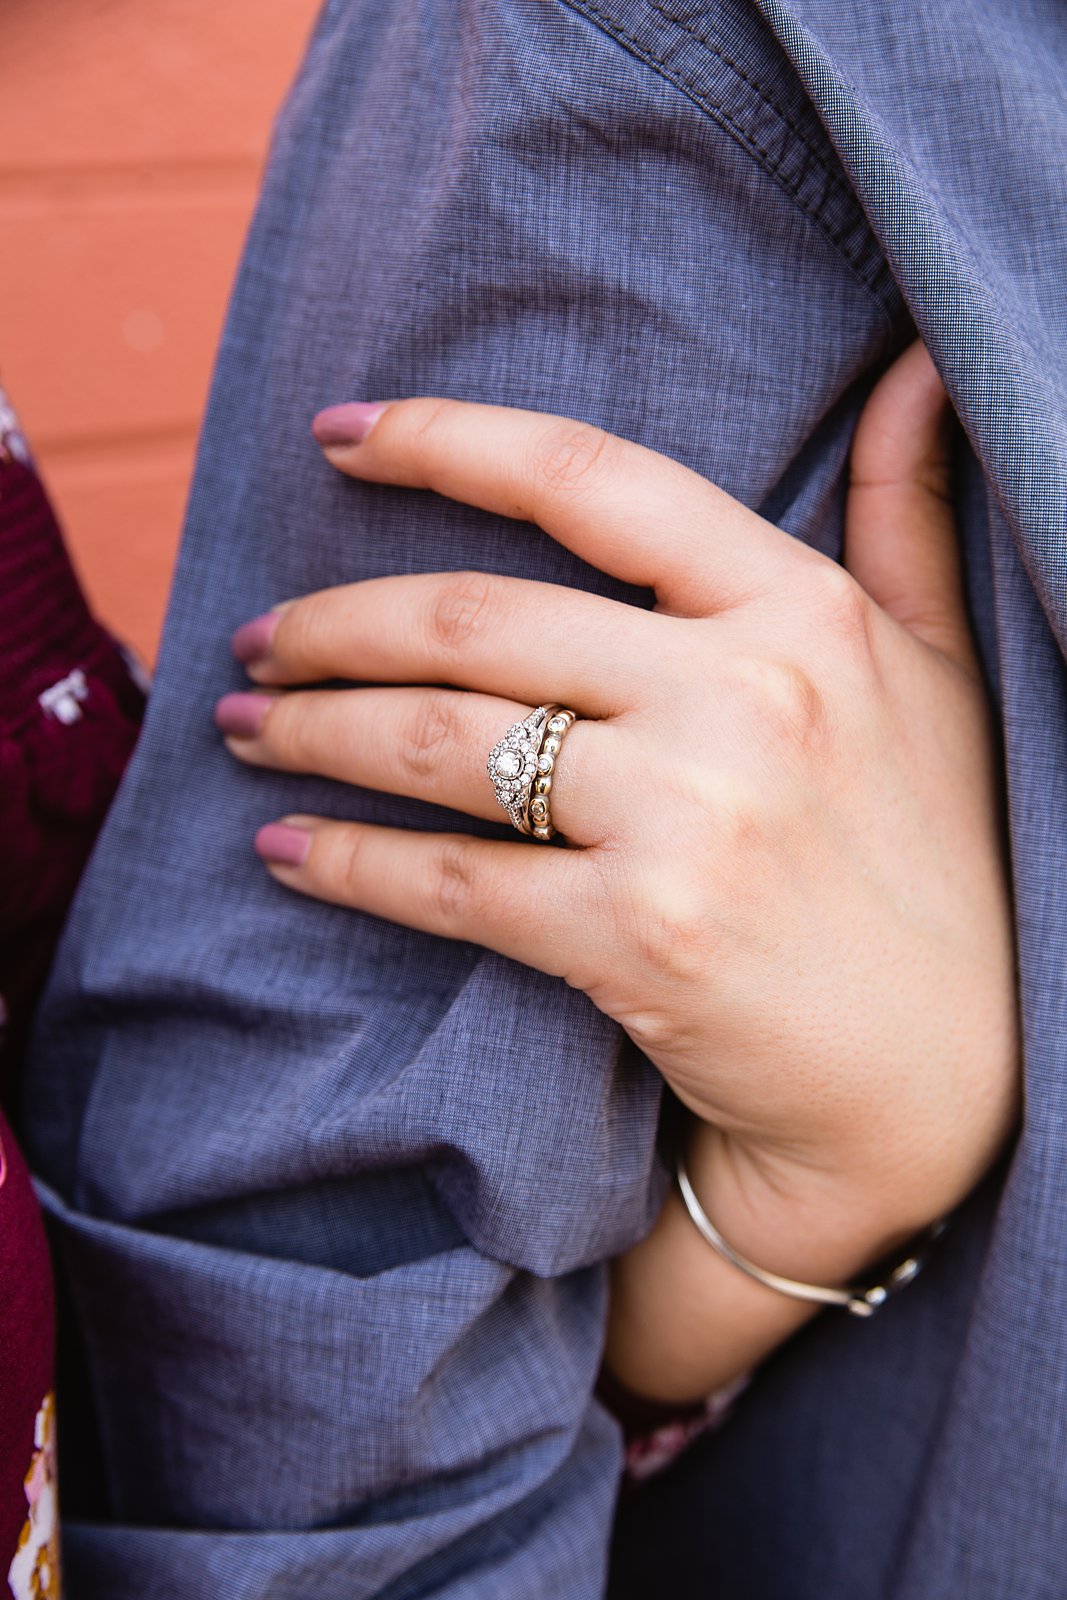 Close up on engagement ring on bride to be's hand.